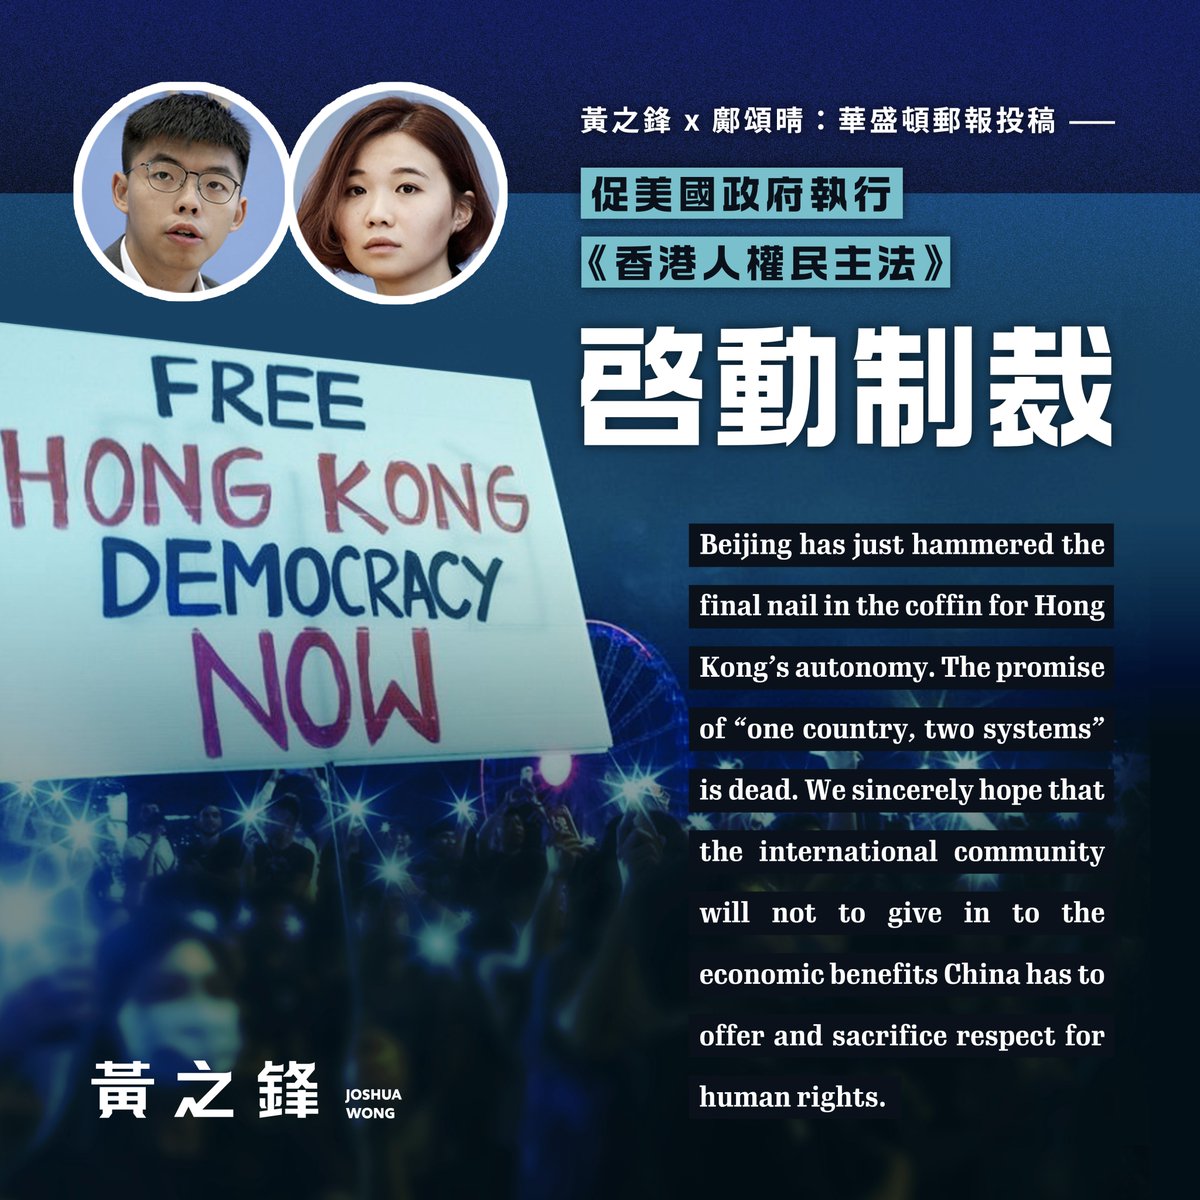 16/ We urge the U.S. government to execute the Hong Kong Human Rights and Democracy Act, impose sanctions on China and include human rights terms in relation to Hong Kong into trade treaties they are about to conclude with China. We ask you, once again, to stand with Hong Kong.